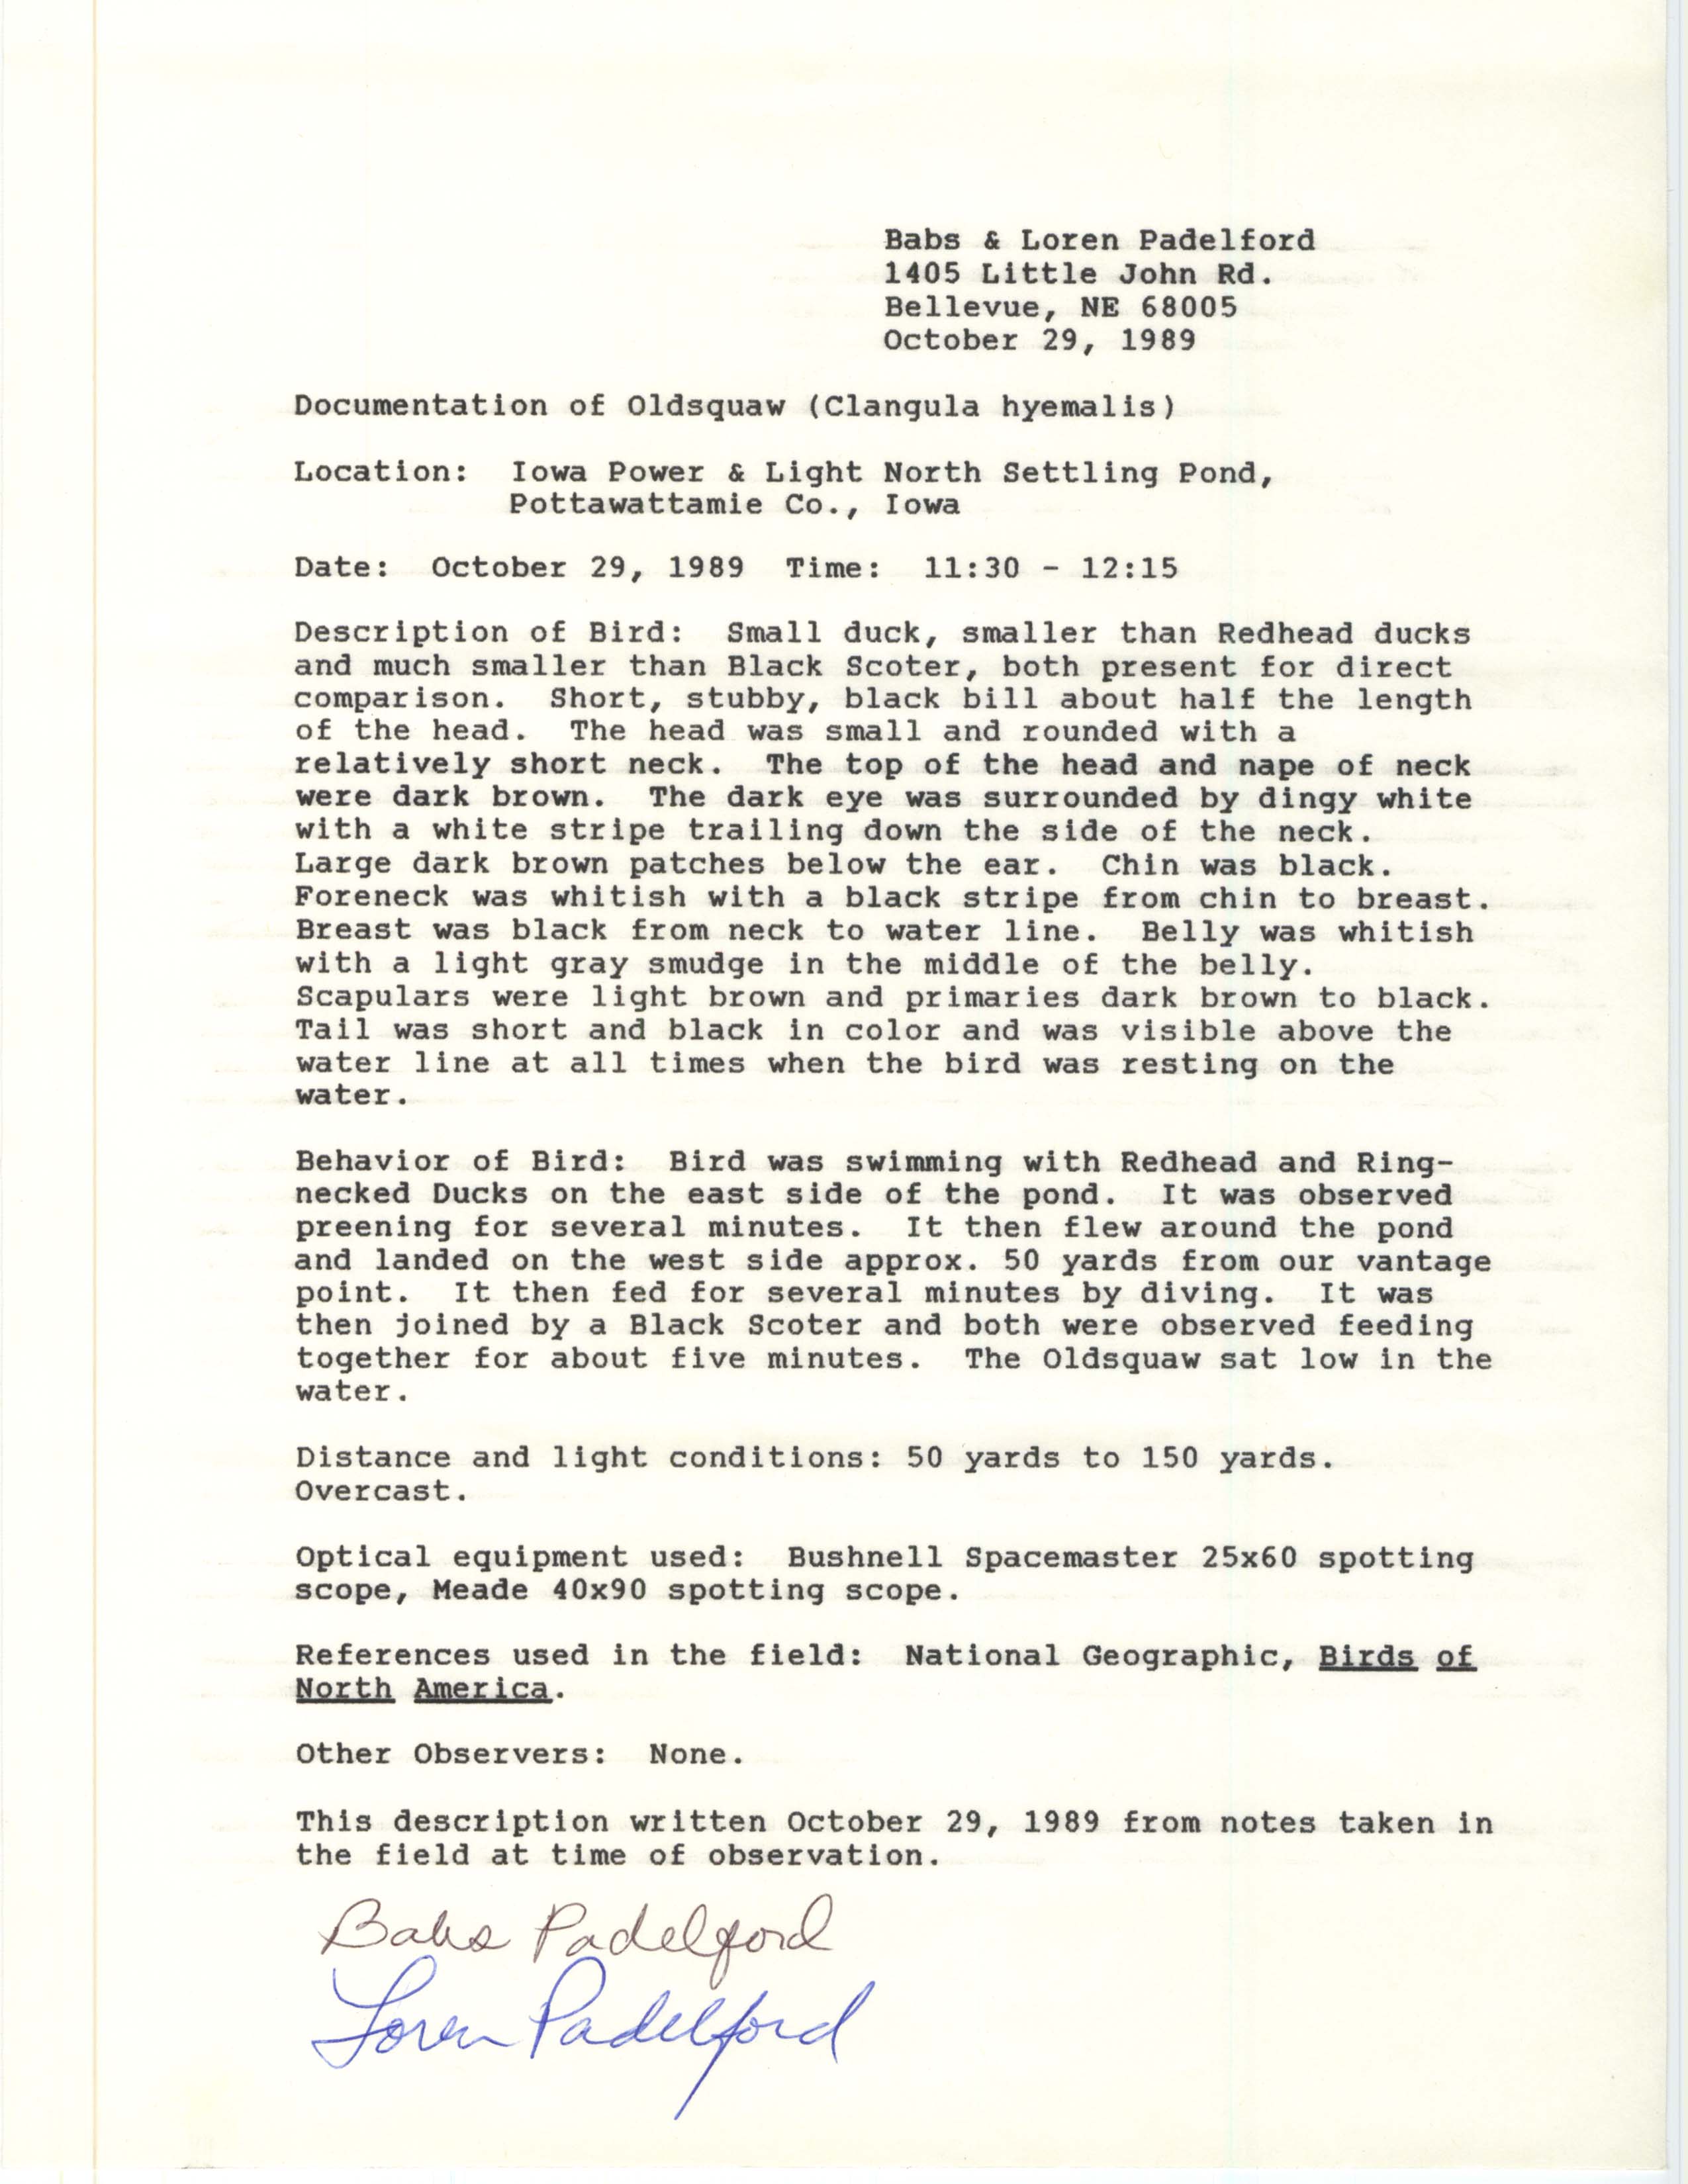 Rare bird documentation form for Long-tailed Duck at MidAmerican Energy Ponds, 1989